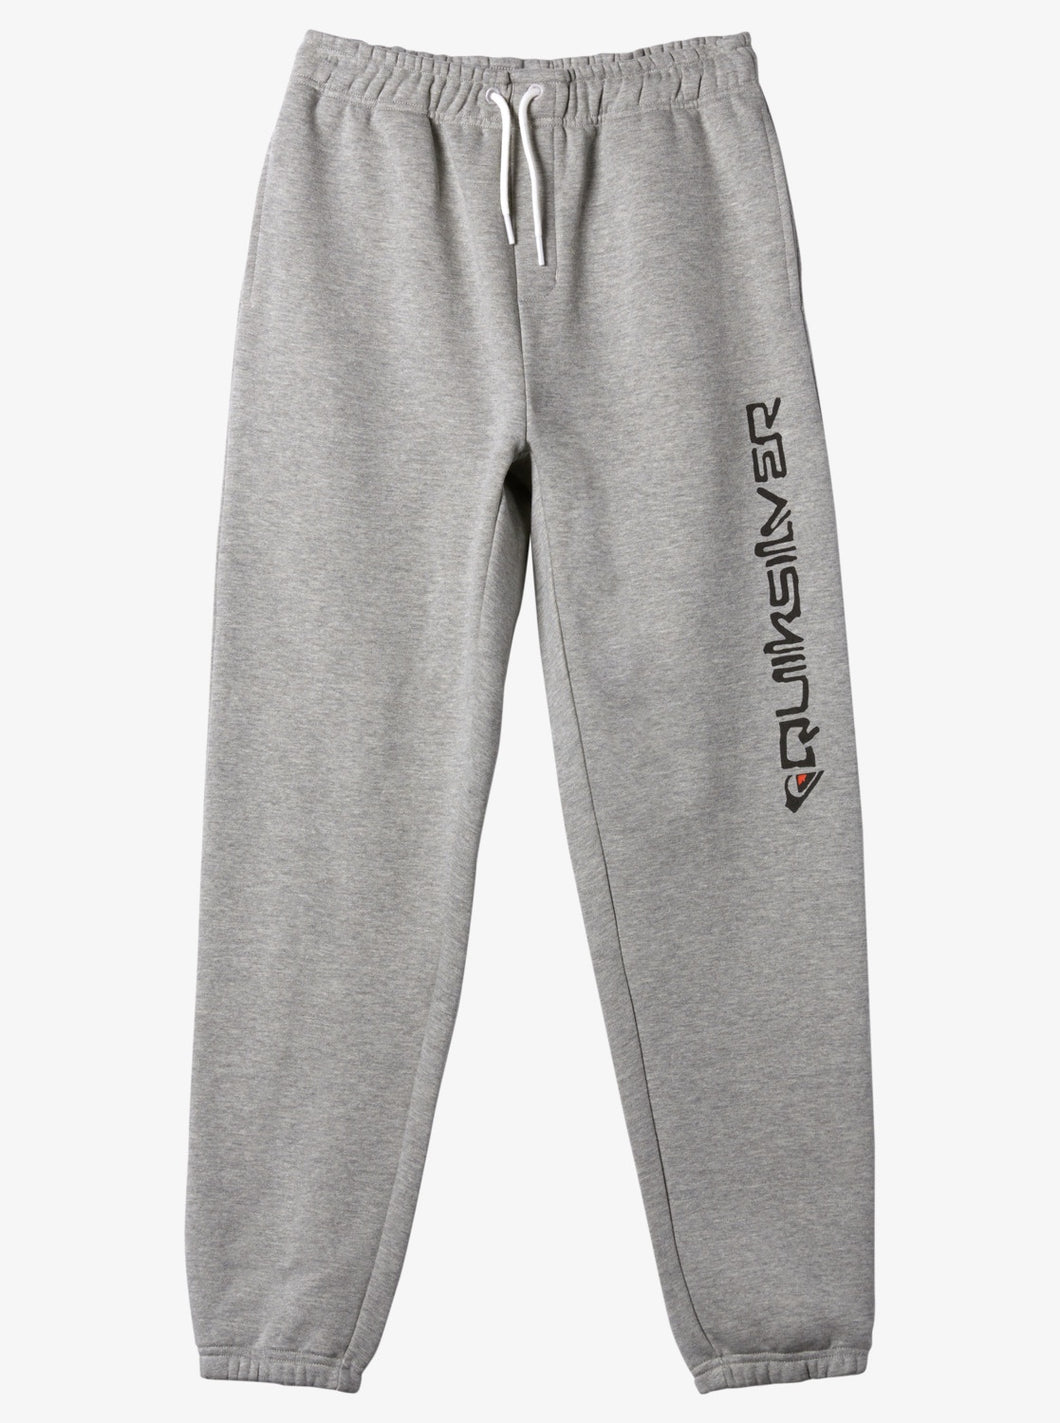 Rainmaker Jogger Youth - Athletic Heather